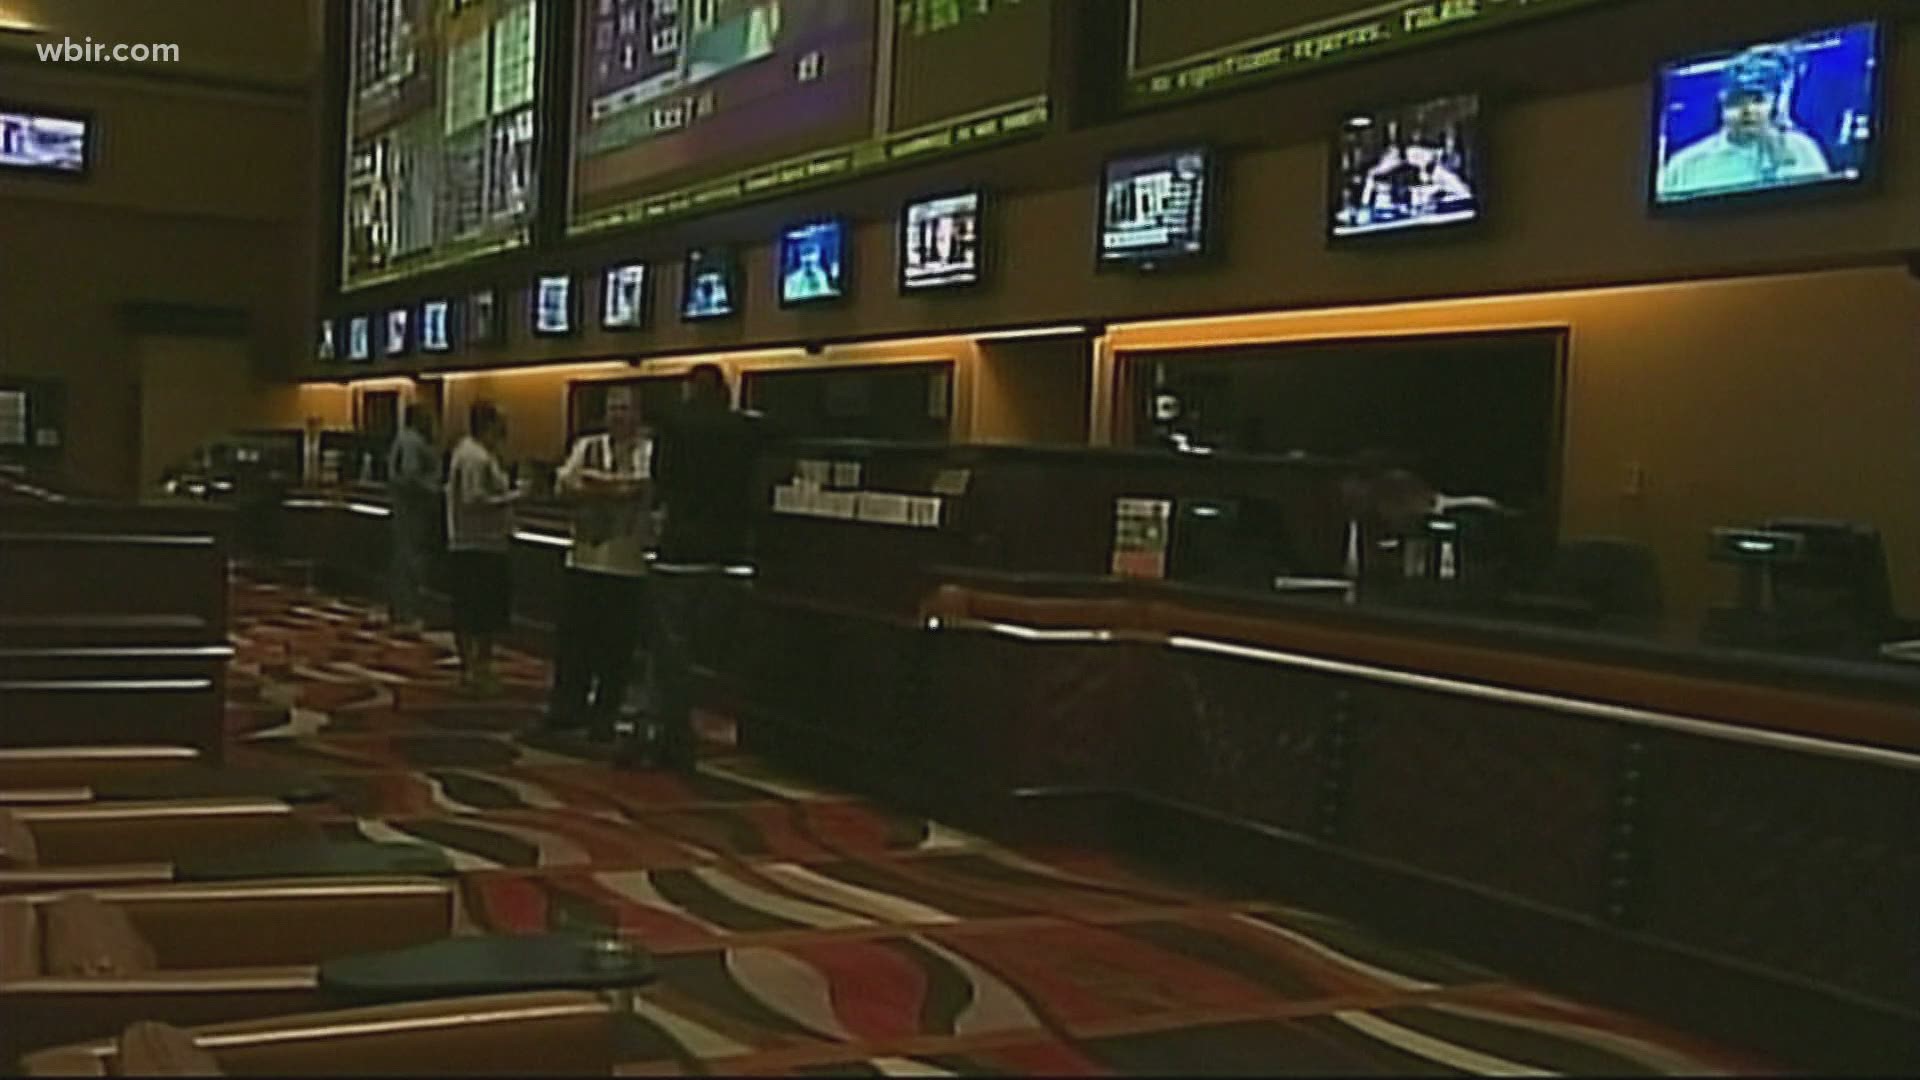 Sunday is the Super Bowl, and sports betting is taking off ahead of the game.